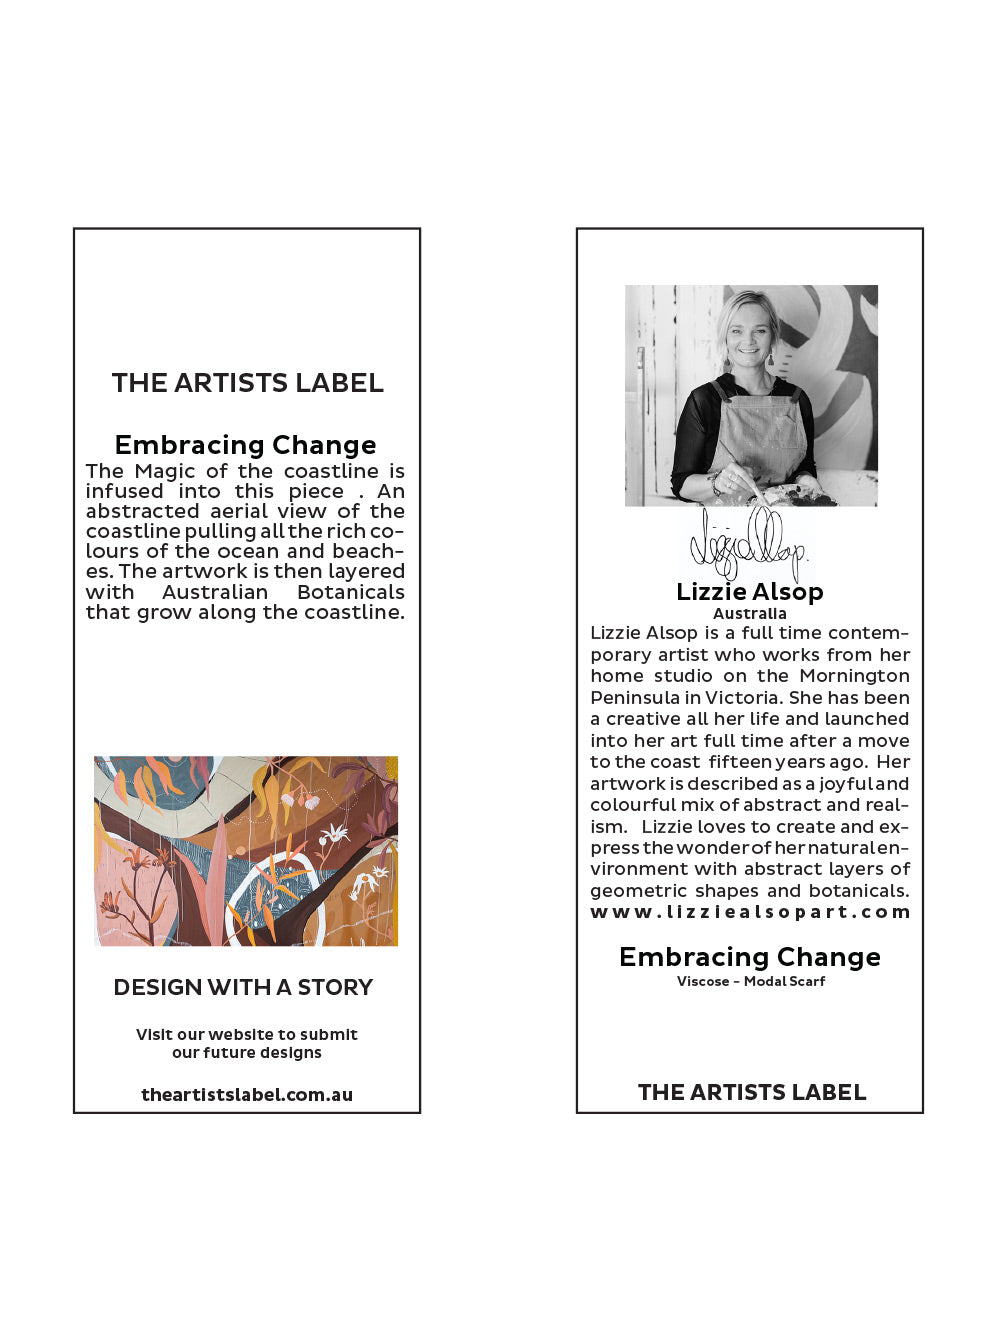 THE ARTISTS LABEL EMBRACING CHANGE SCARF